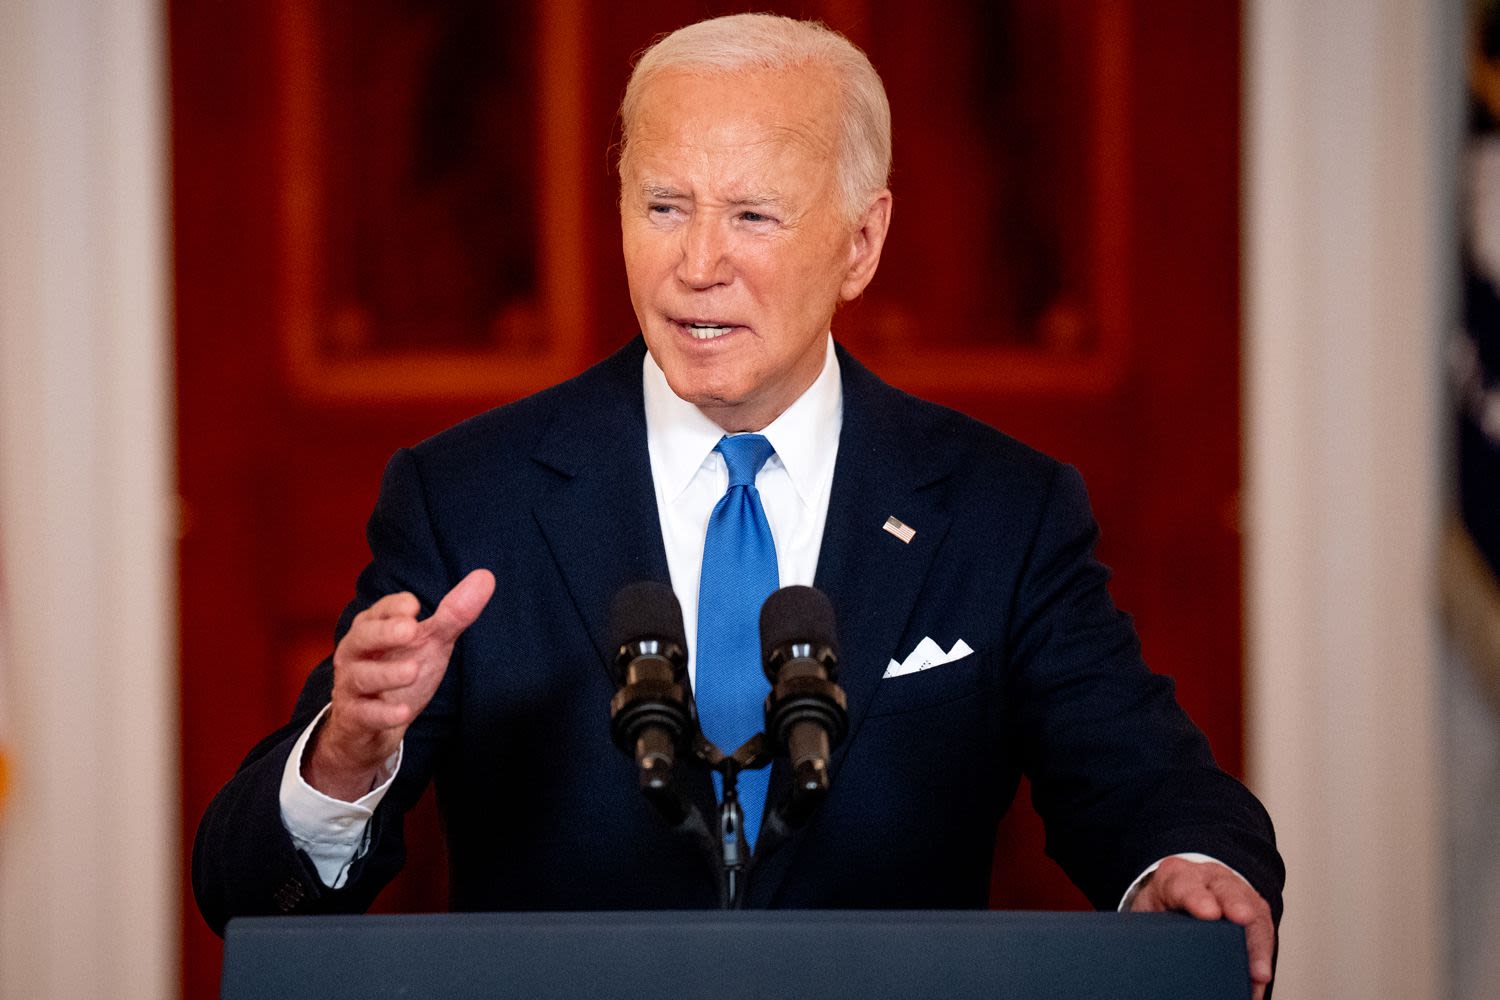 'Frantic Phone Calls' and Lots of 'Waiting': Inside the Biden Campaign as Democrats Push for New Nominee (Exclusive)